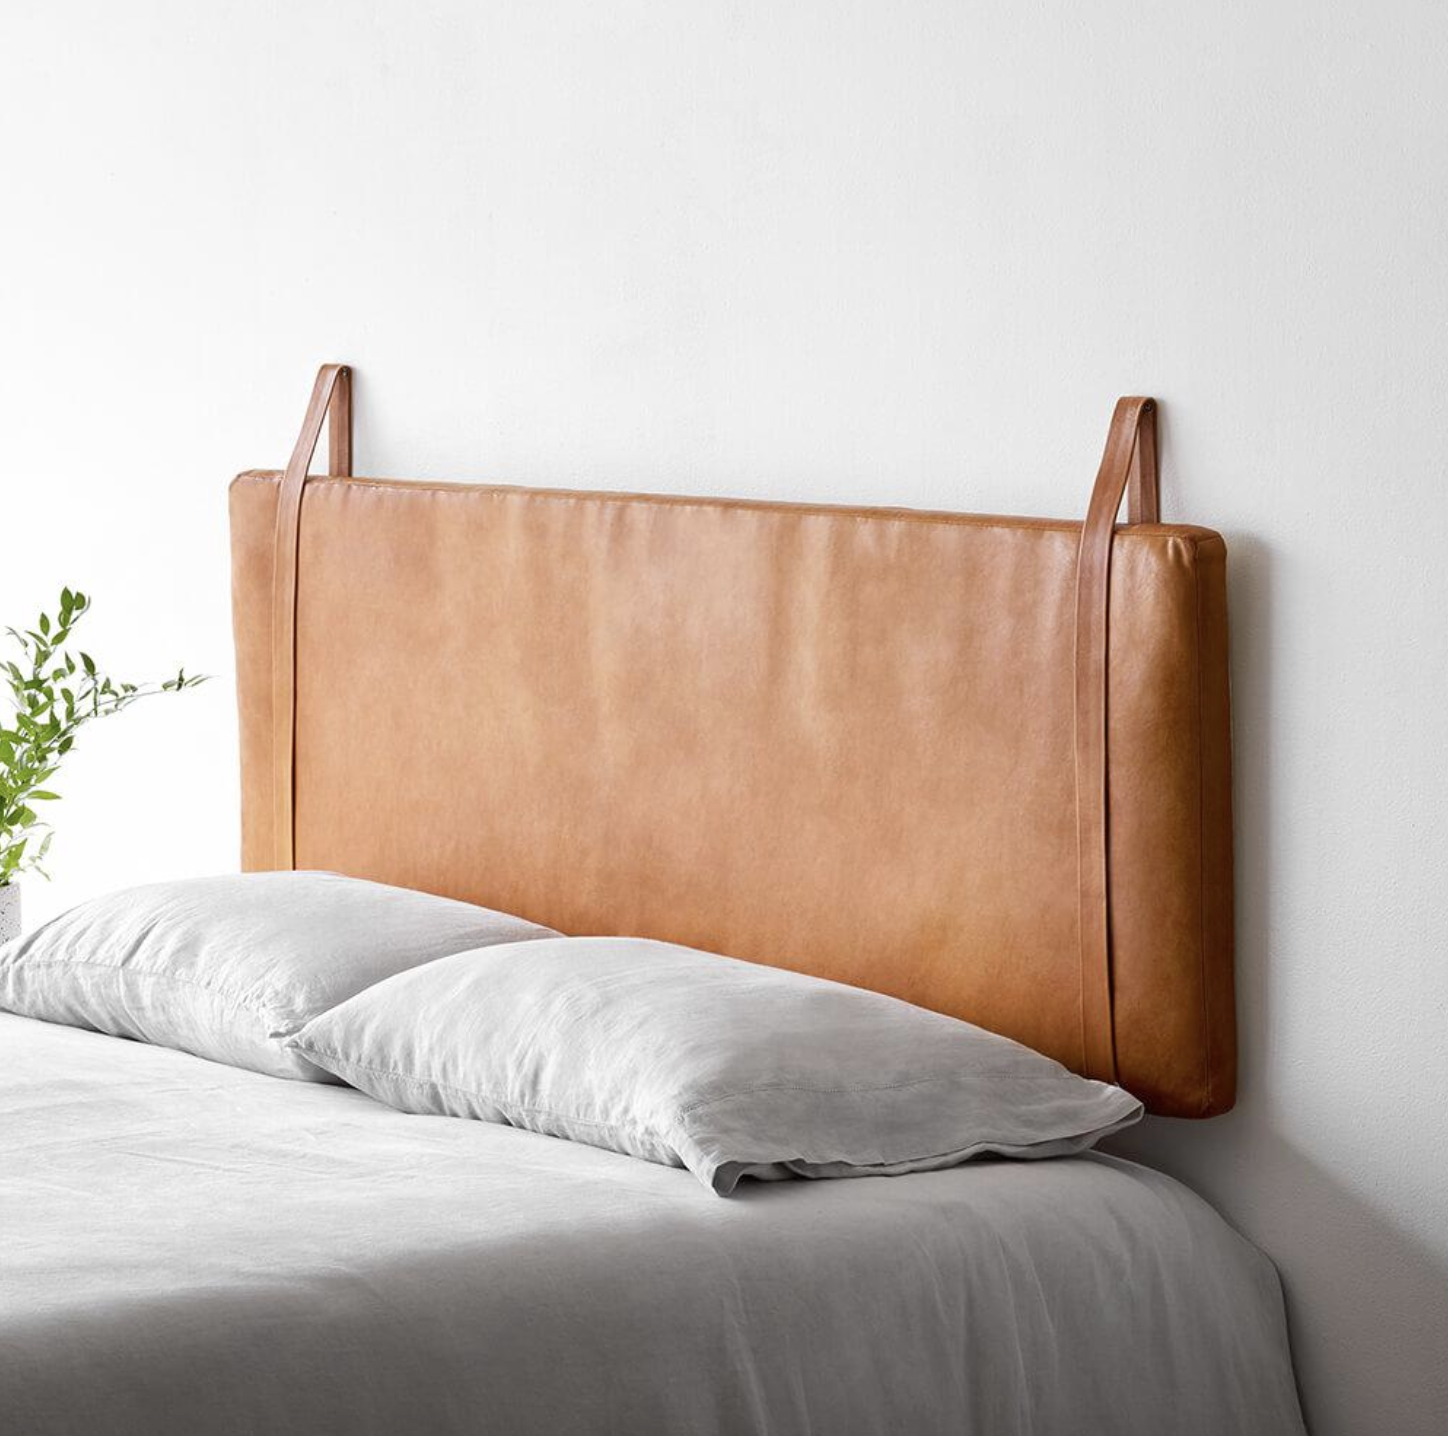 9 Wall Mounted Floating Headboards We, King Size Headboard With Built In Reading Lights